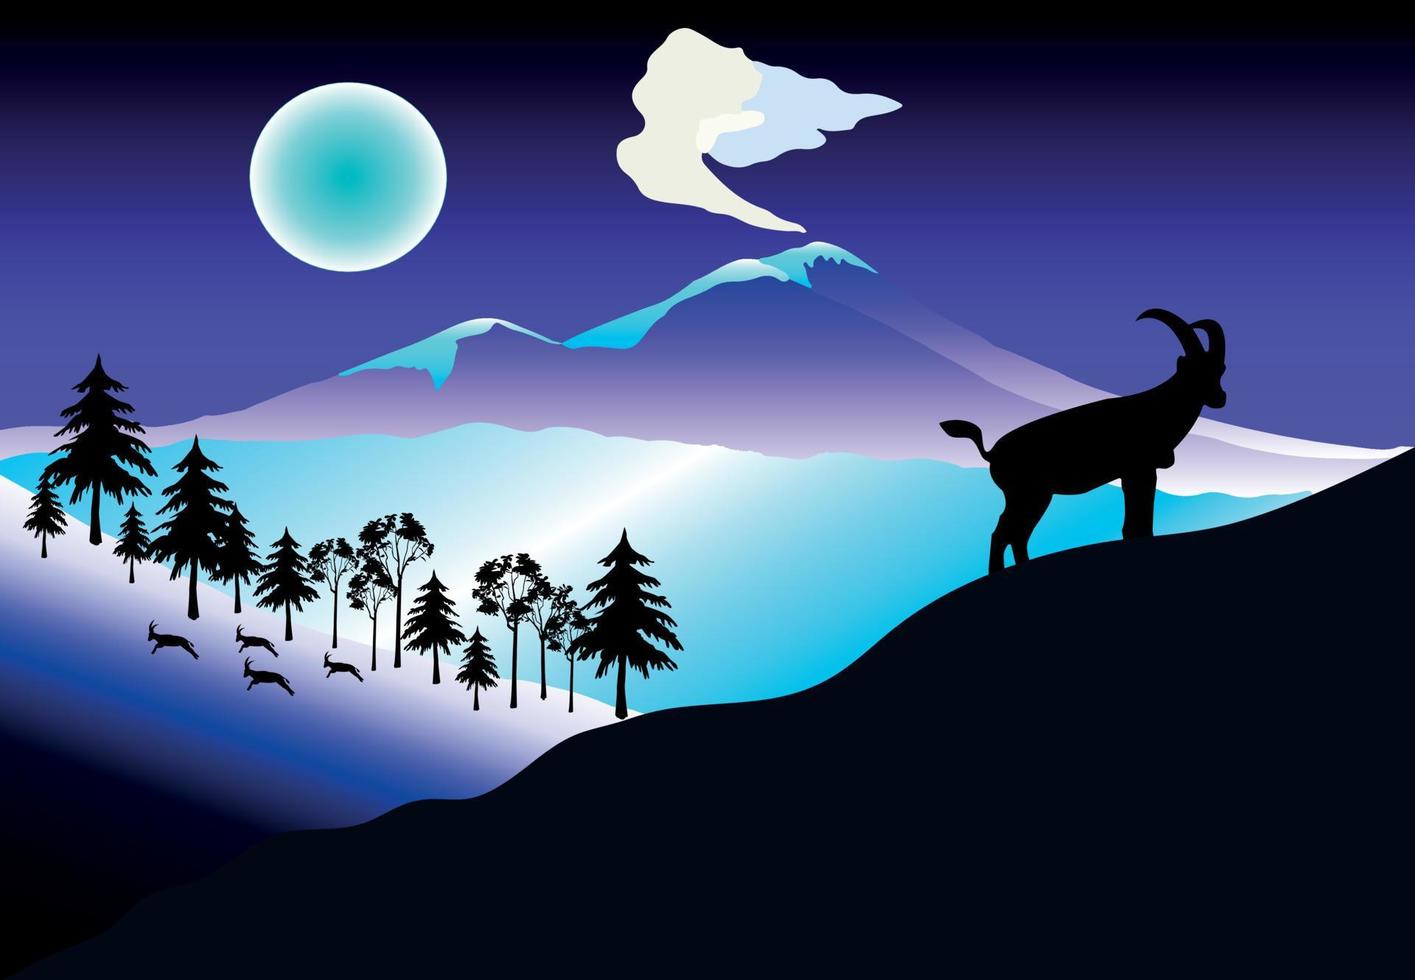 The mountain goat silhouette background vector illustration